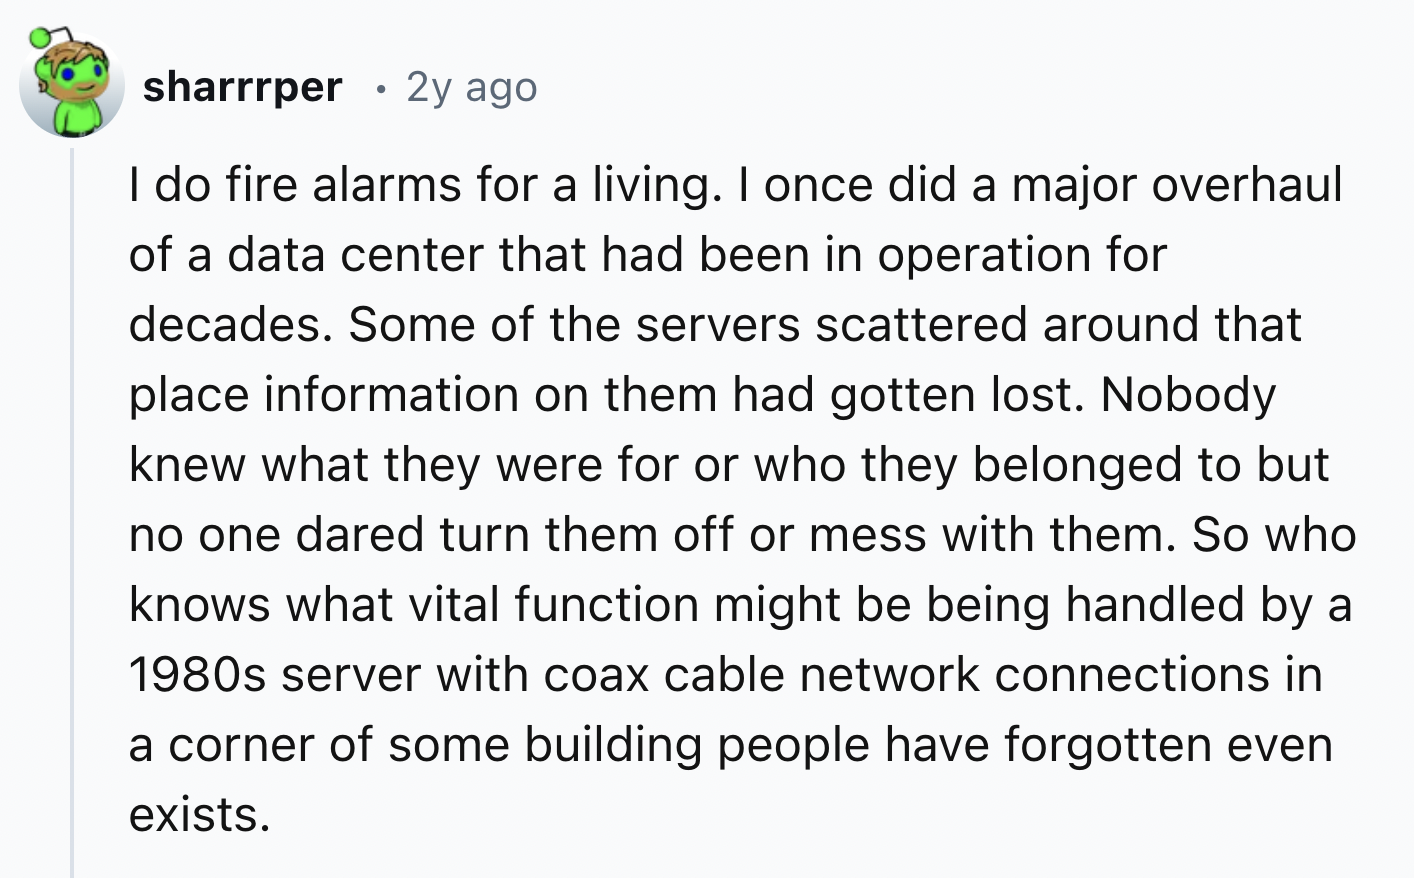 screenshot - sharrrper 2y ago I do fire alarms for a living. I once did a major overhaul of a data center that had been in operation for decades. Some of the servers scattered around that place information on them had gotten lost. Nobody knew what they we